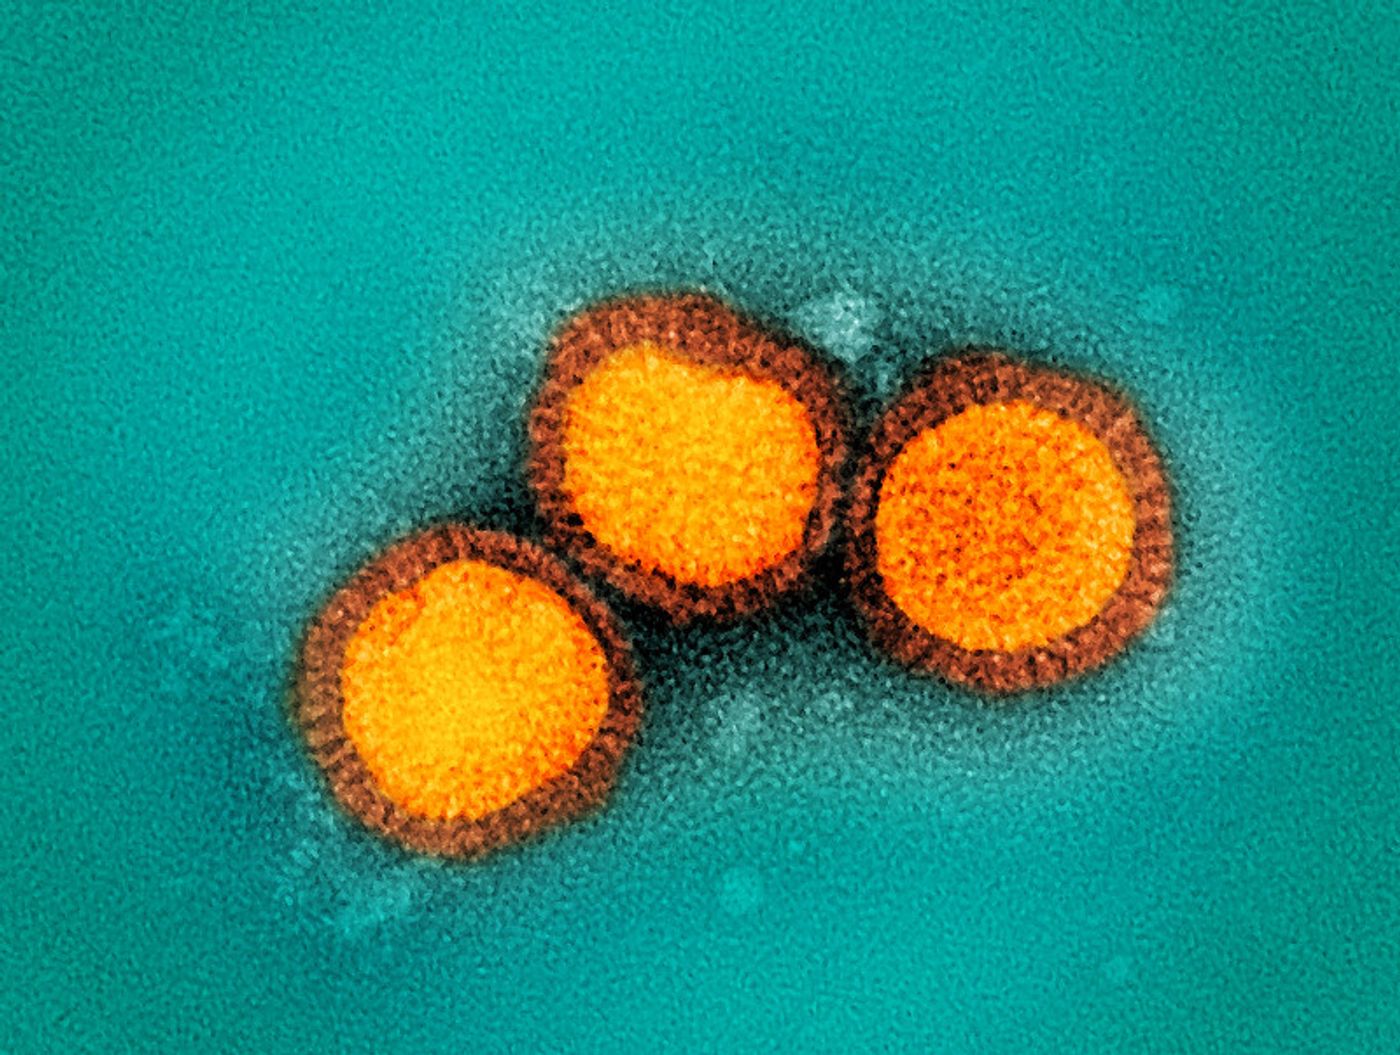 nfluenza B virus particles, colorized gold, isolated from a patient sample and then propagated in cell culture. Both influenza A and B can cause seasonal flu; however, unlike influenza A virus, which can also infect animals, influenza B only infects humans. Microscopy by John Gallagher and Audray Harris, NIAID Laboratory of Infectious Diseases. Credit: NIAID